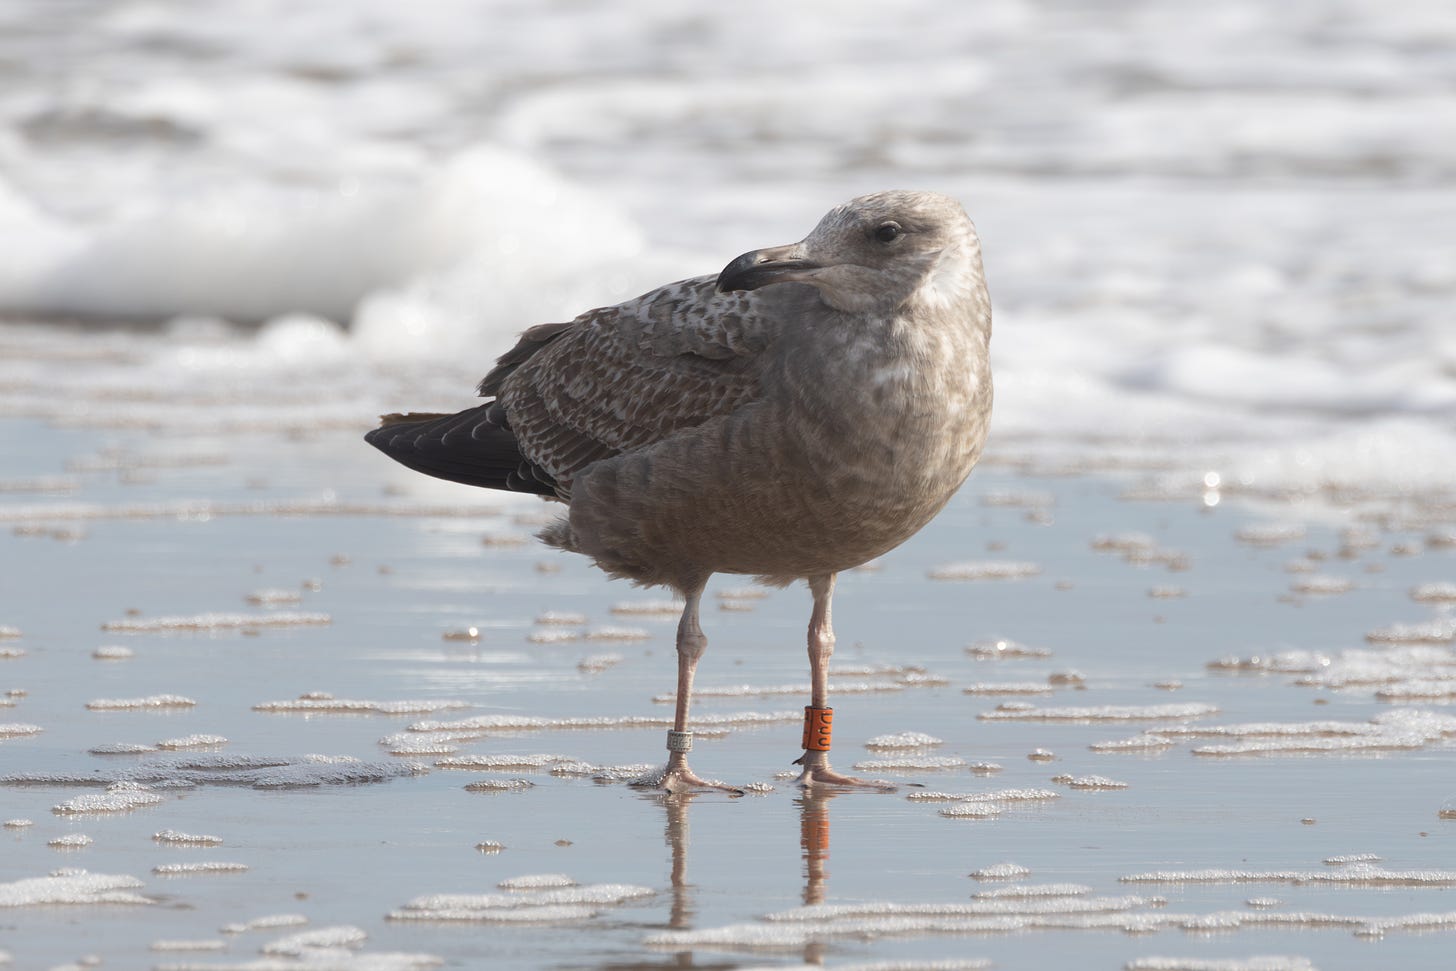 a gray seagull facing left with an orange band on its left leg and a metal band on its right leg, standing on wet sand with the ocean in the background